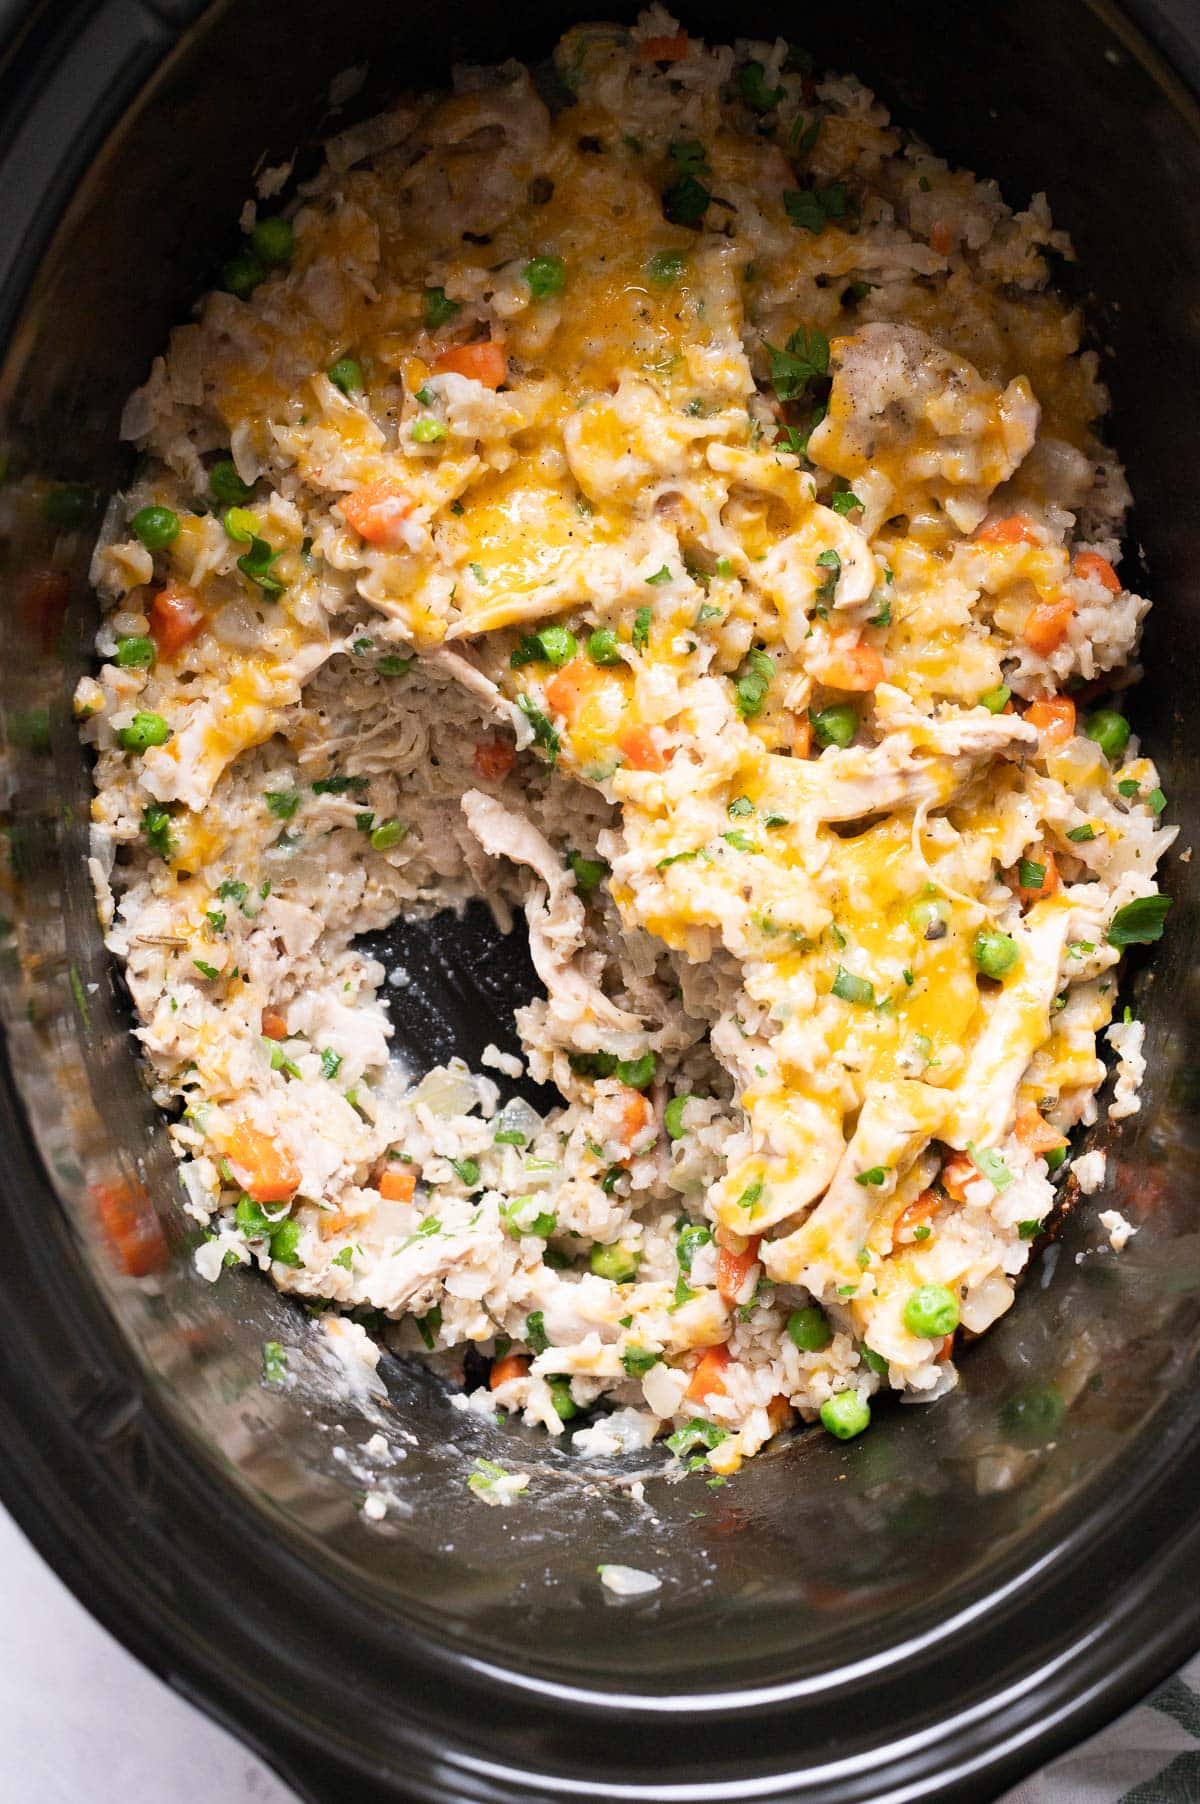 Close up showing texture of chicken and rice in Crock-Pot.